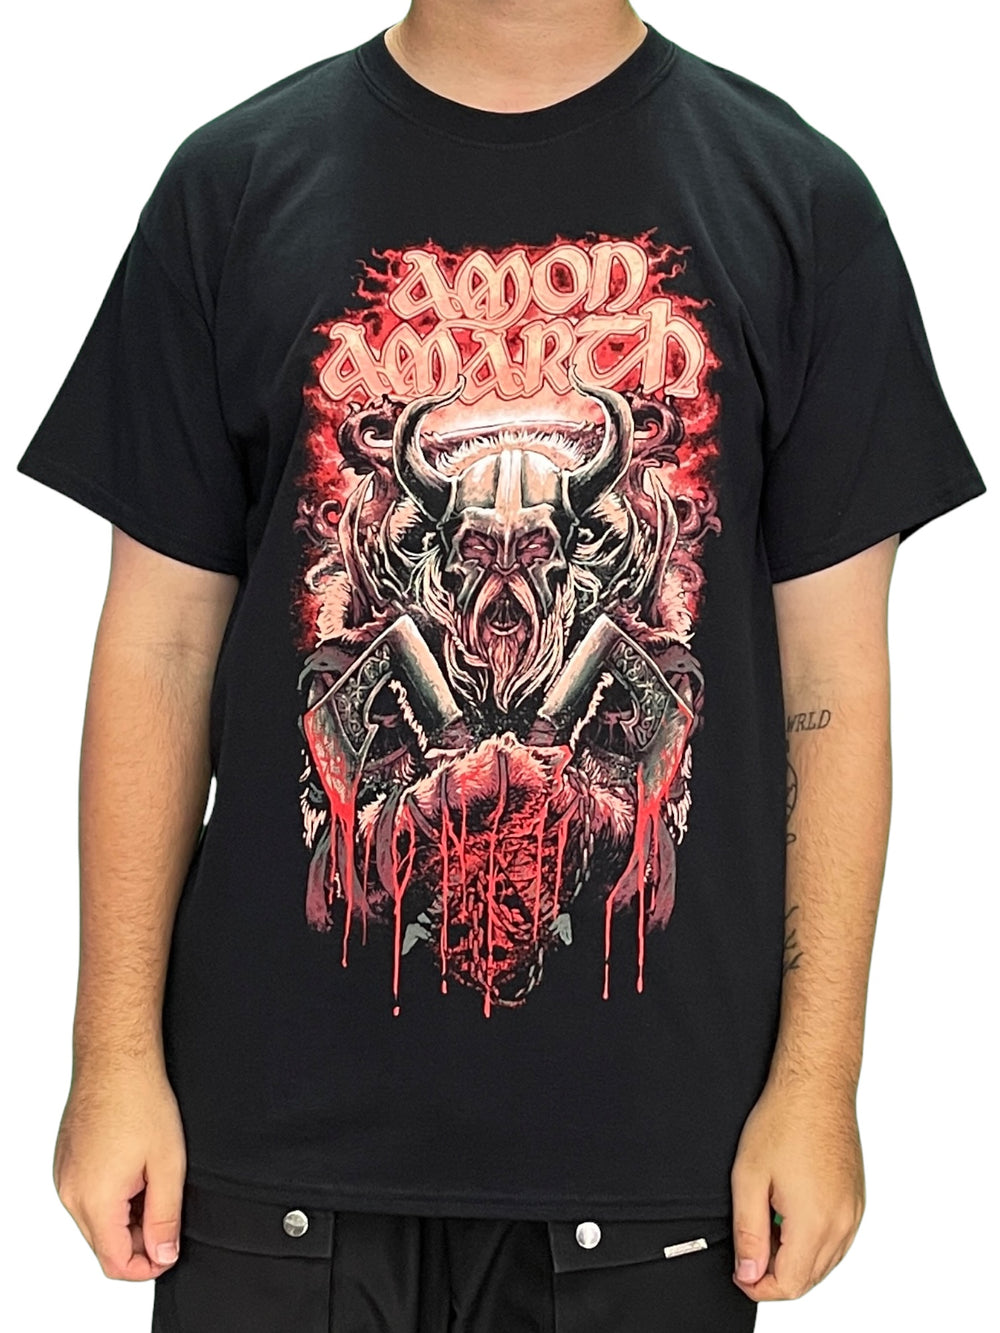 Amon Amarth Fight Official Unisex T Shirt Brand New Various Sizes Back Printed